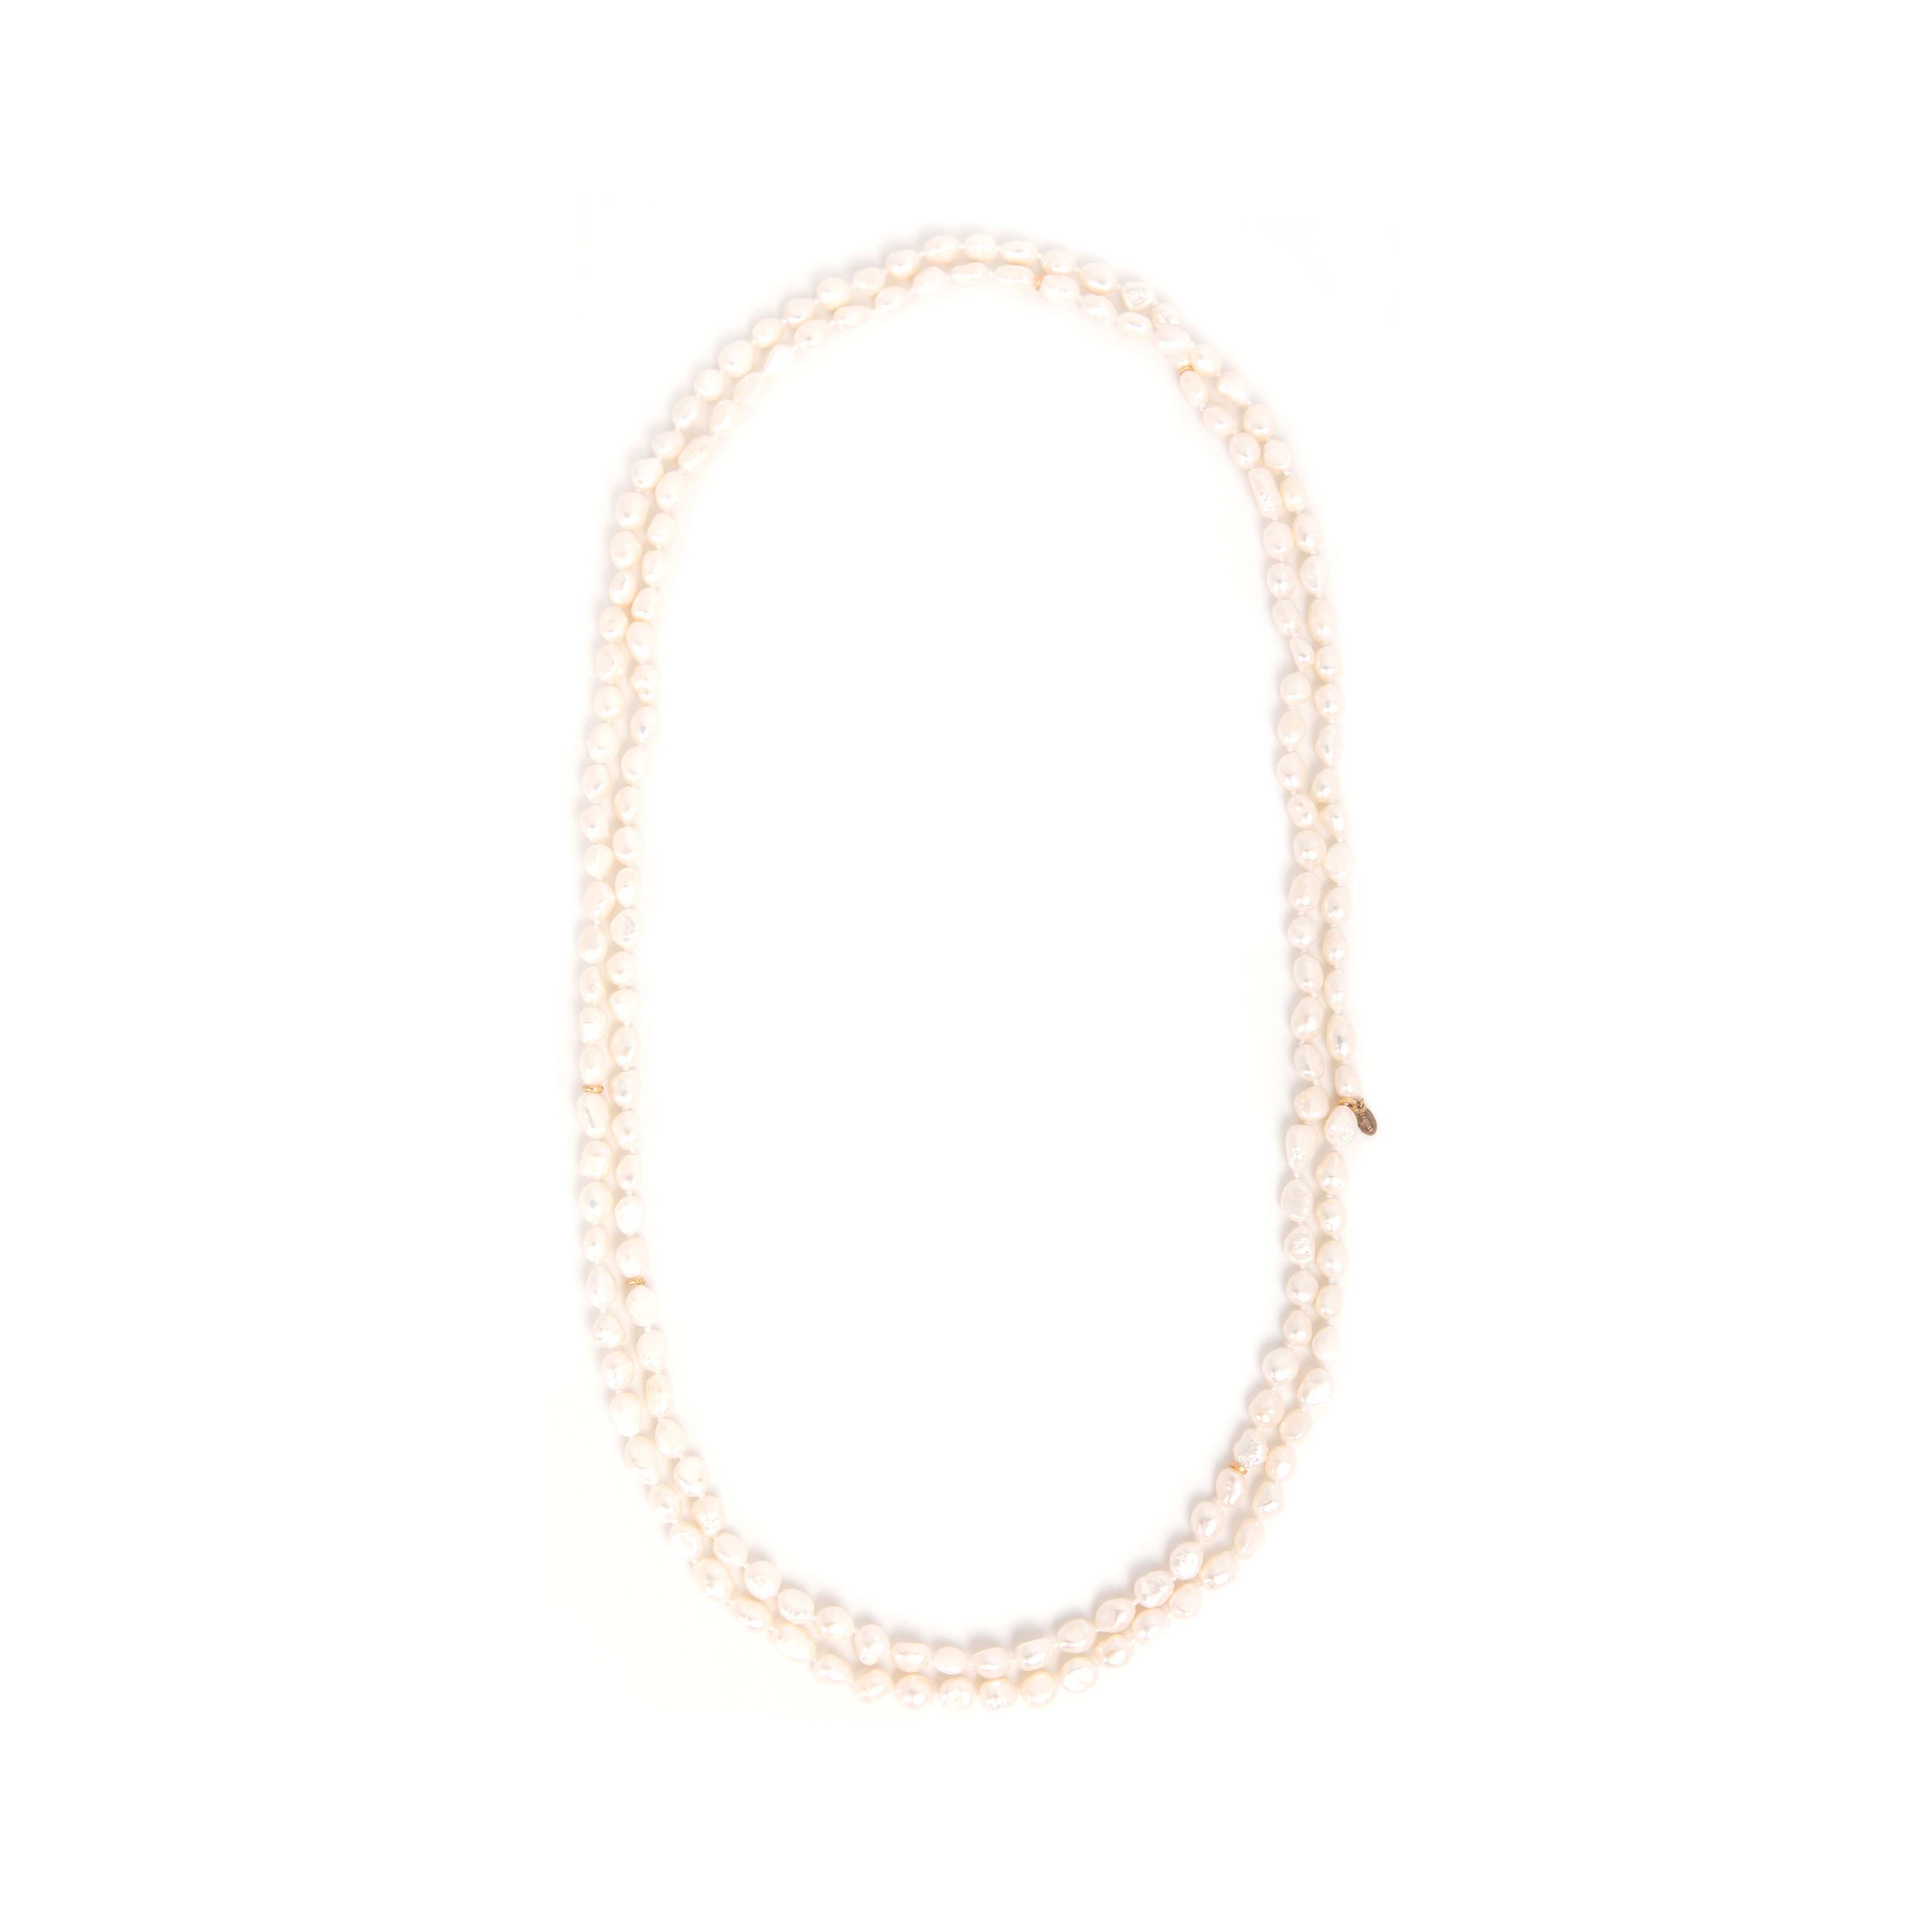 Cubagua Necklace #6 (160cm) - White Pearl Necklaces TARBAY   